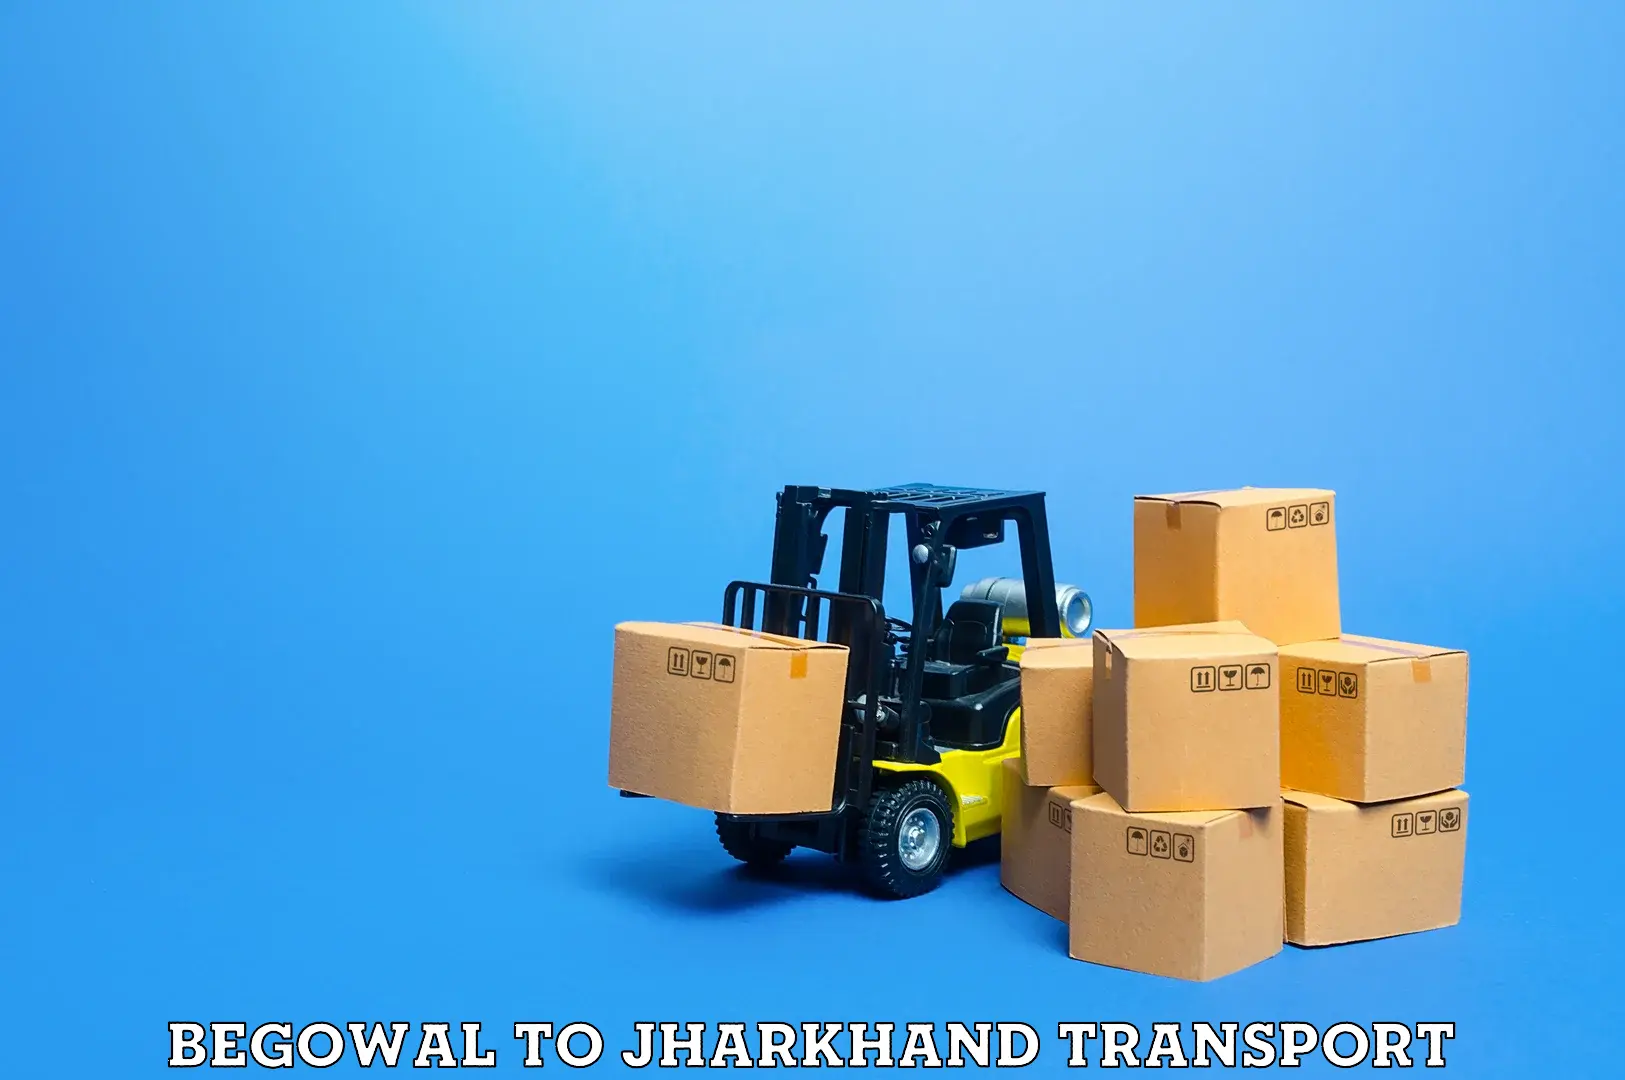 Daily transport service Begowal to Jharkhand